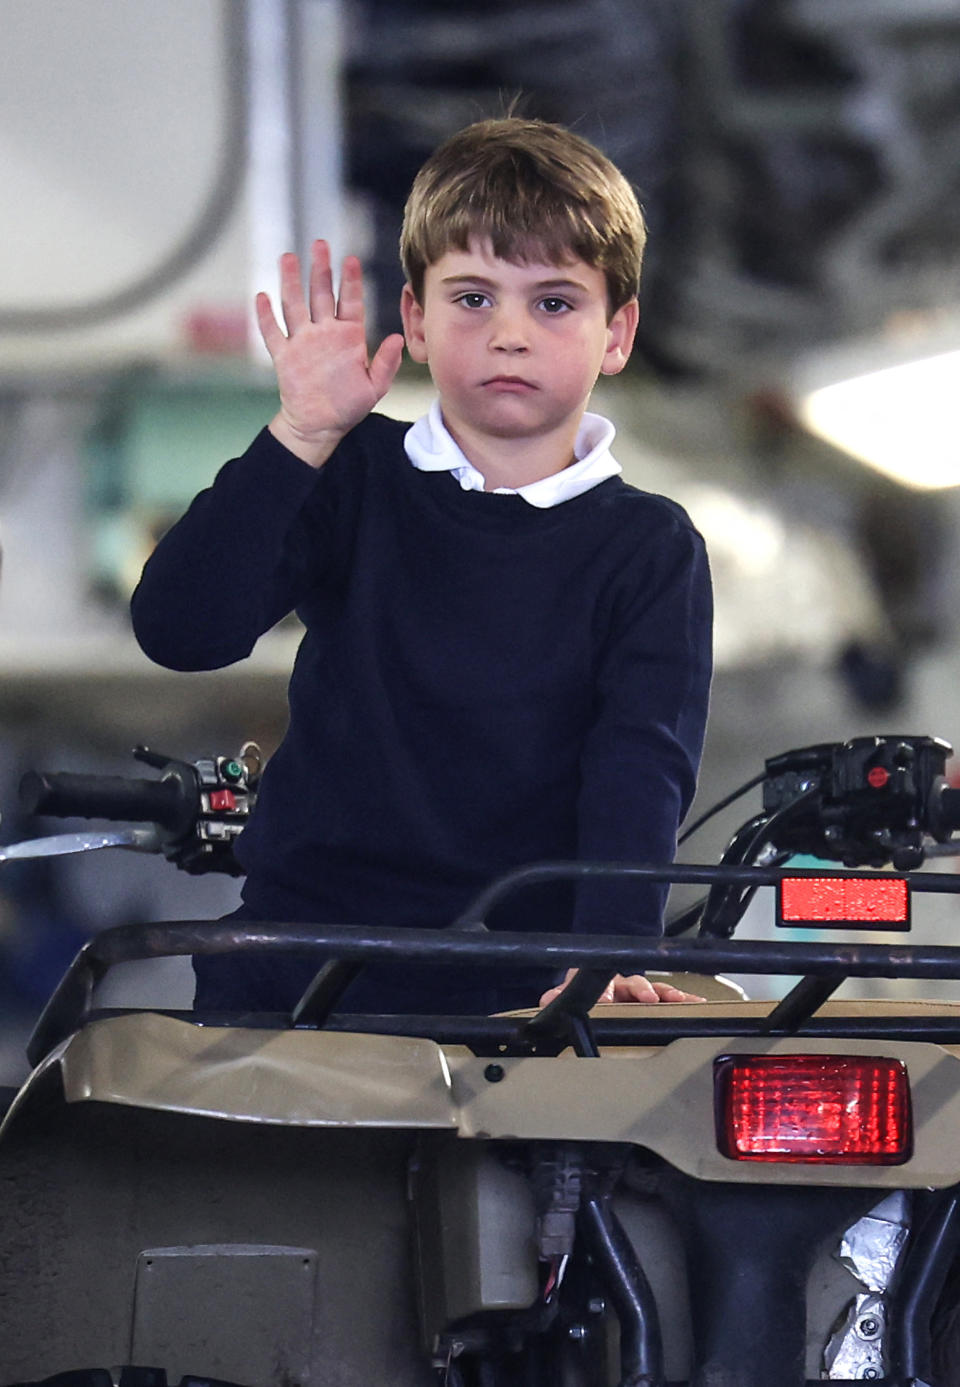 Britain's Prince Louis of Wales waves as he sits inside a vehicle on a C17 plane during a visit to the Air Tattoo at RAF Fairford on July 14, 2023 in Fairford, central England. (Photo by Chris Jackson / POOL / AFP) (Photo by CHRIS JACKSON/POOL/AFP via Getty Images)